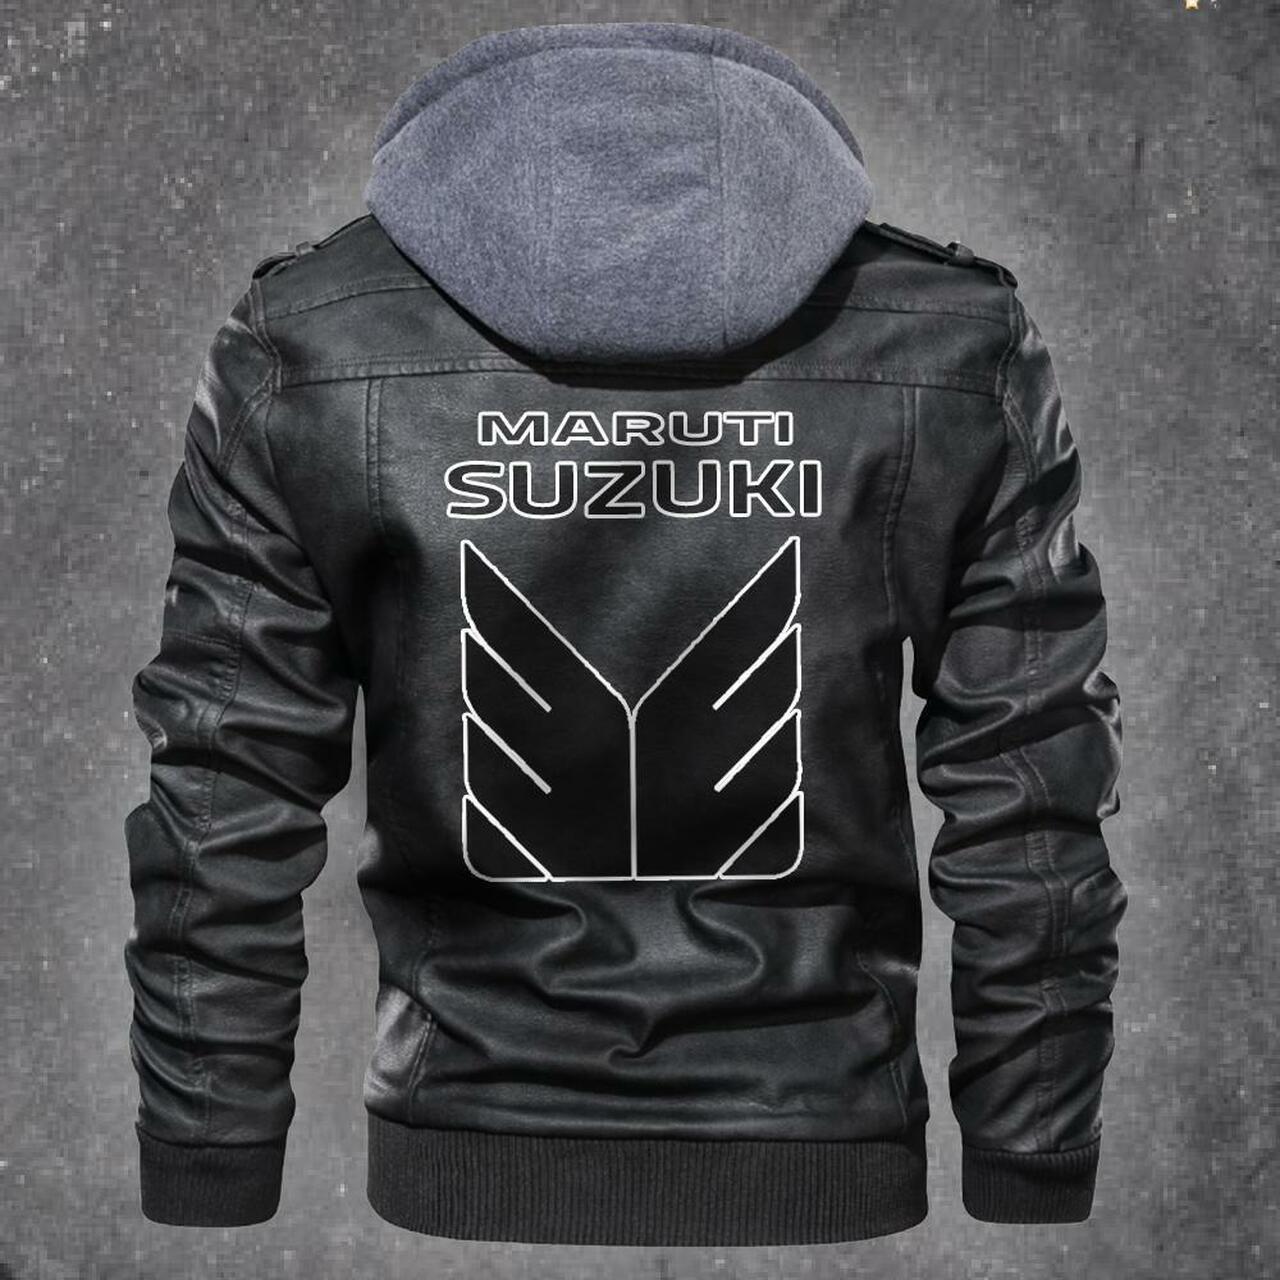 Check out and find the right leather jacket below 263